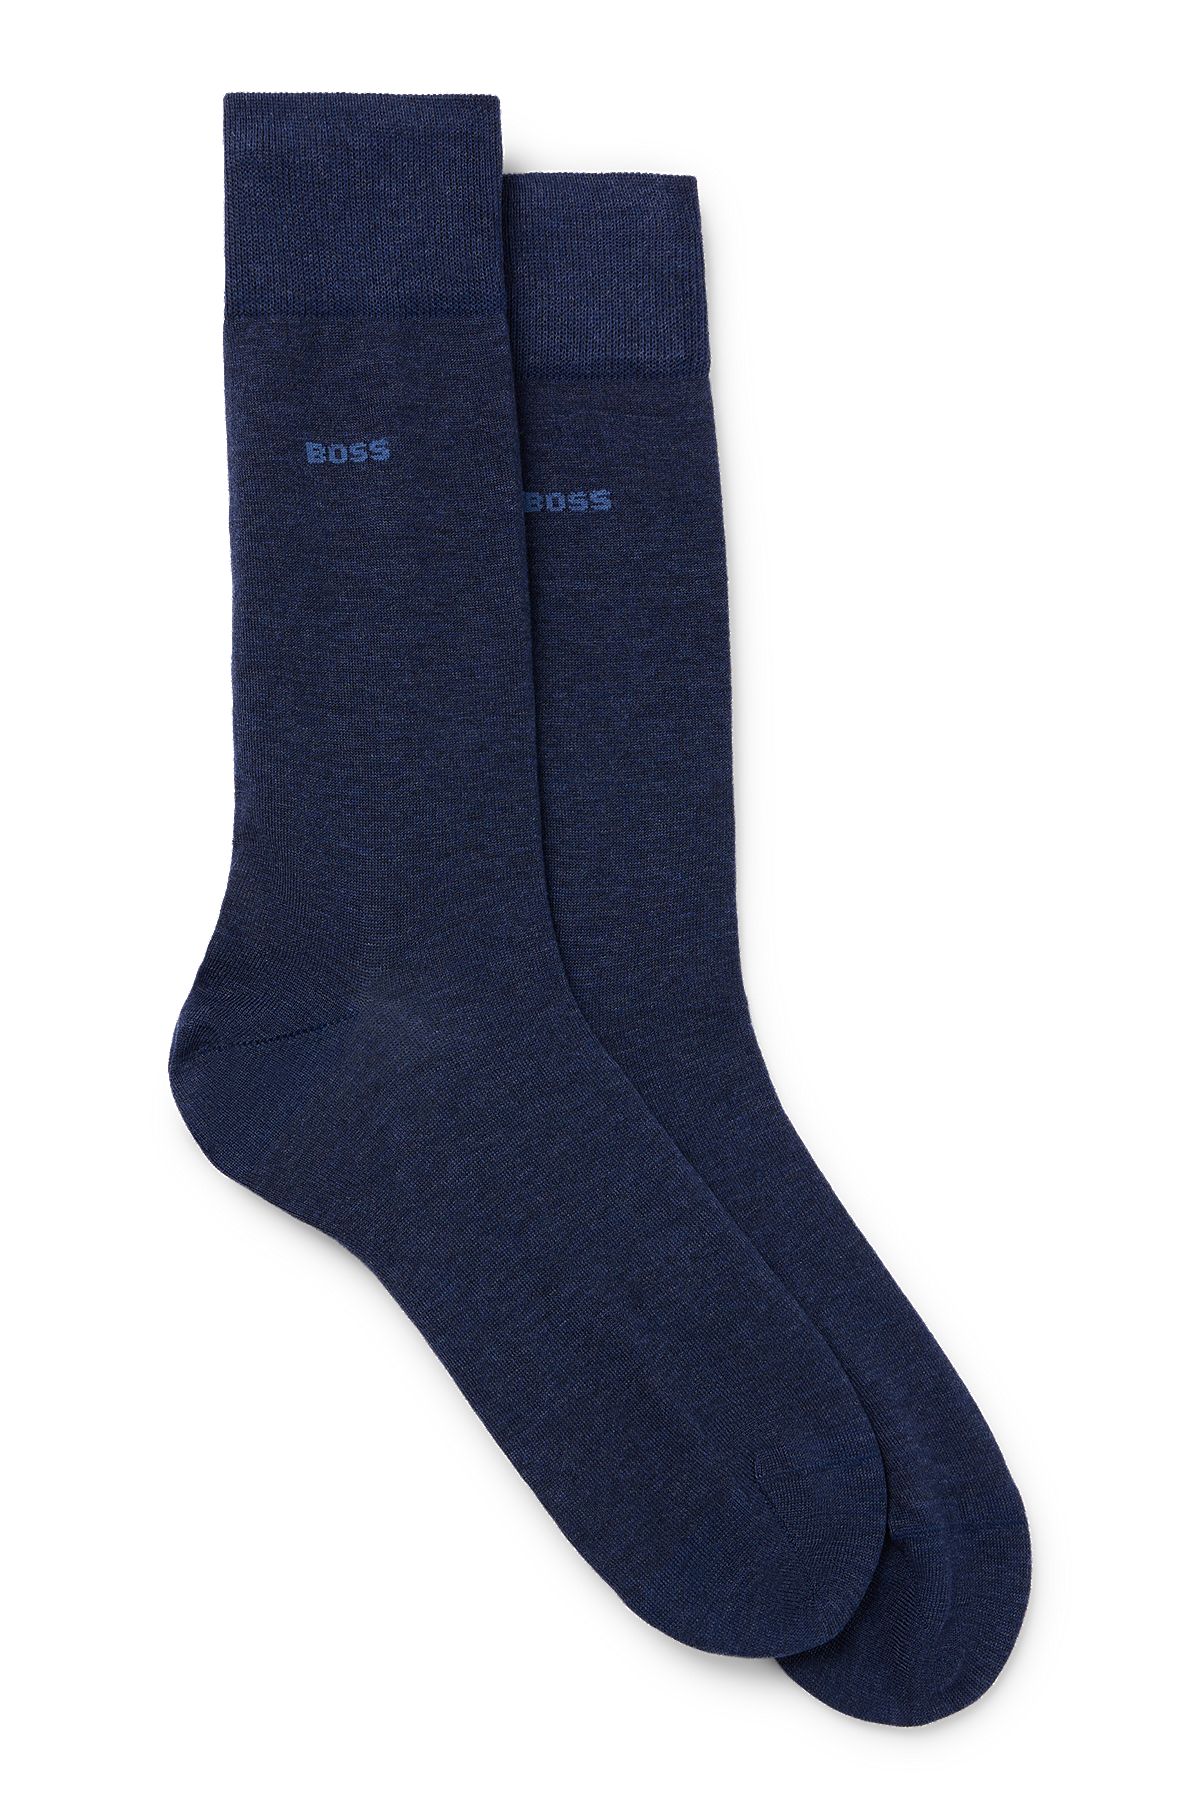 Two-pack in BOSS cotton of stretch - regular-length socks